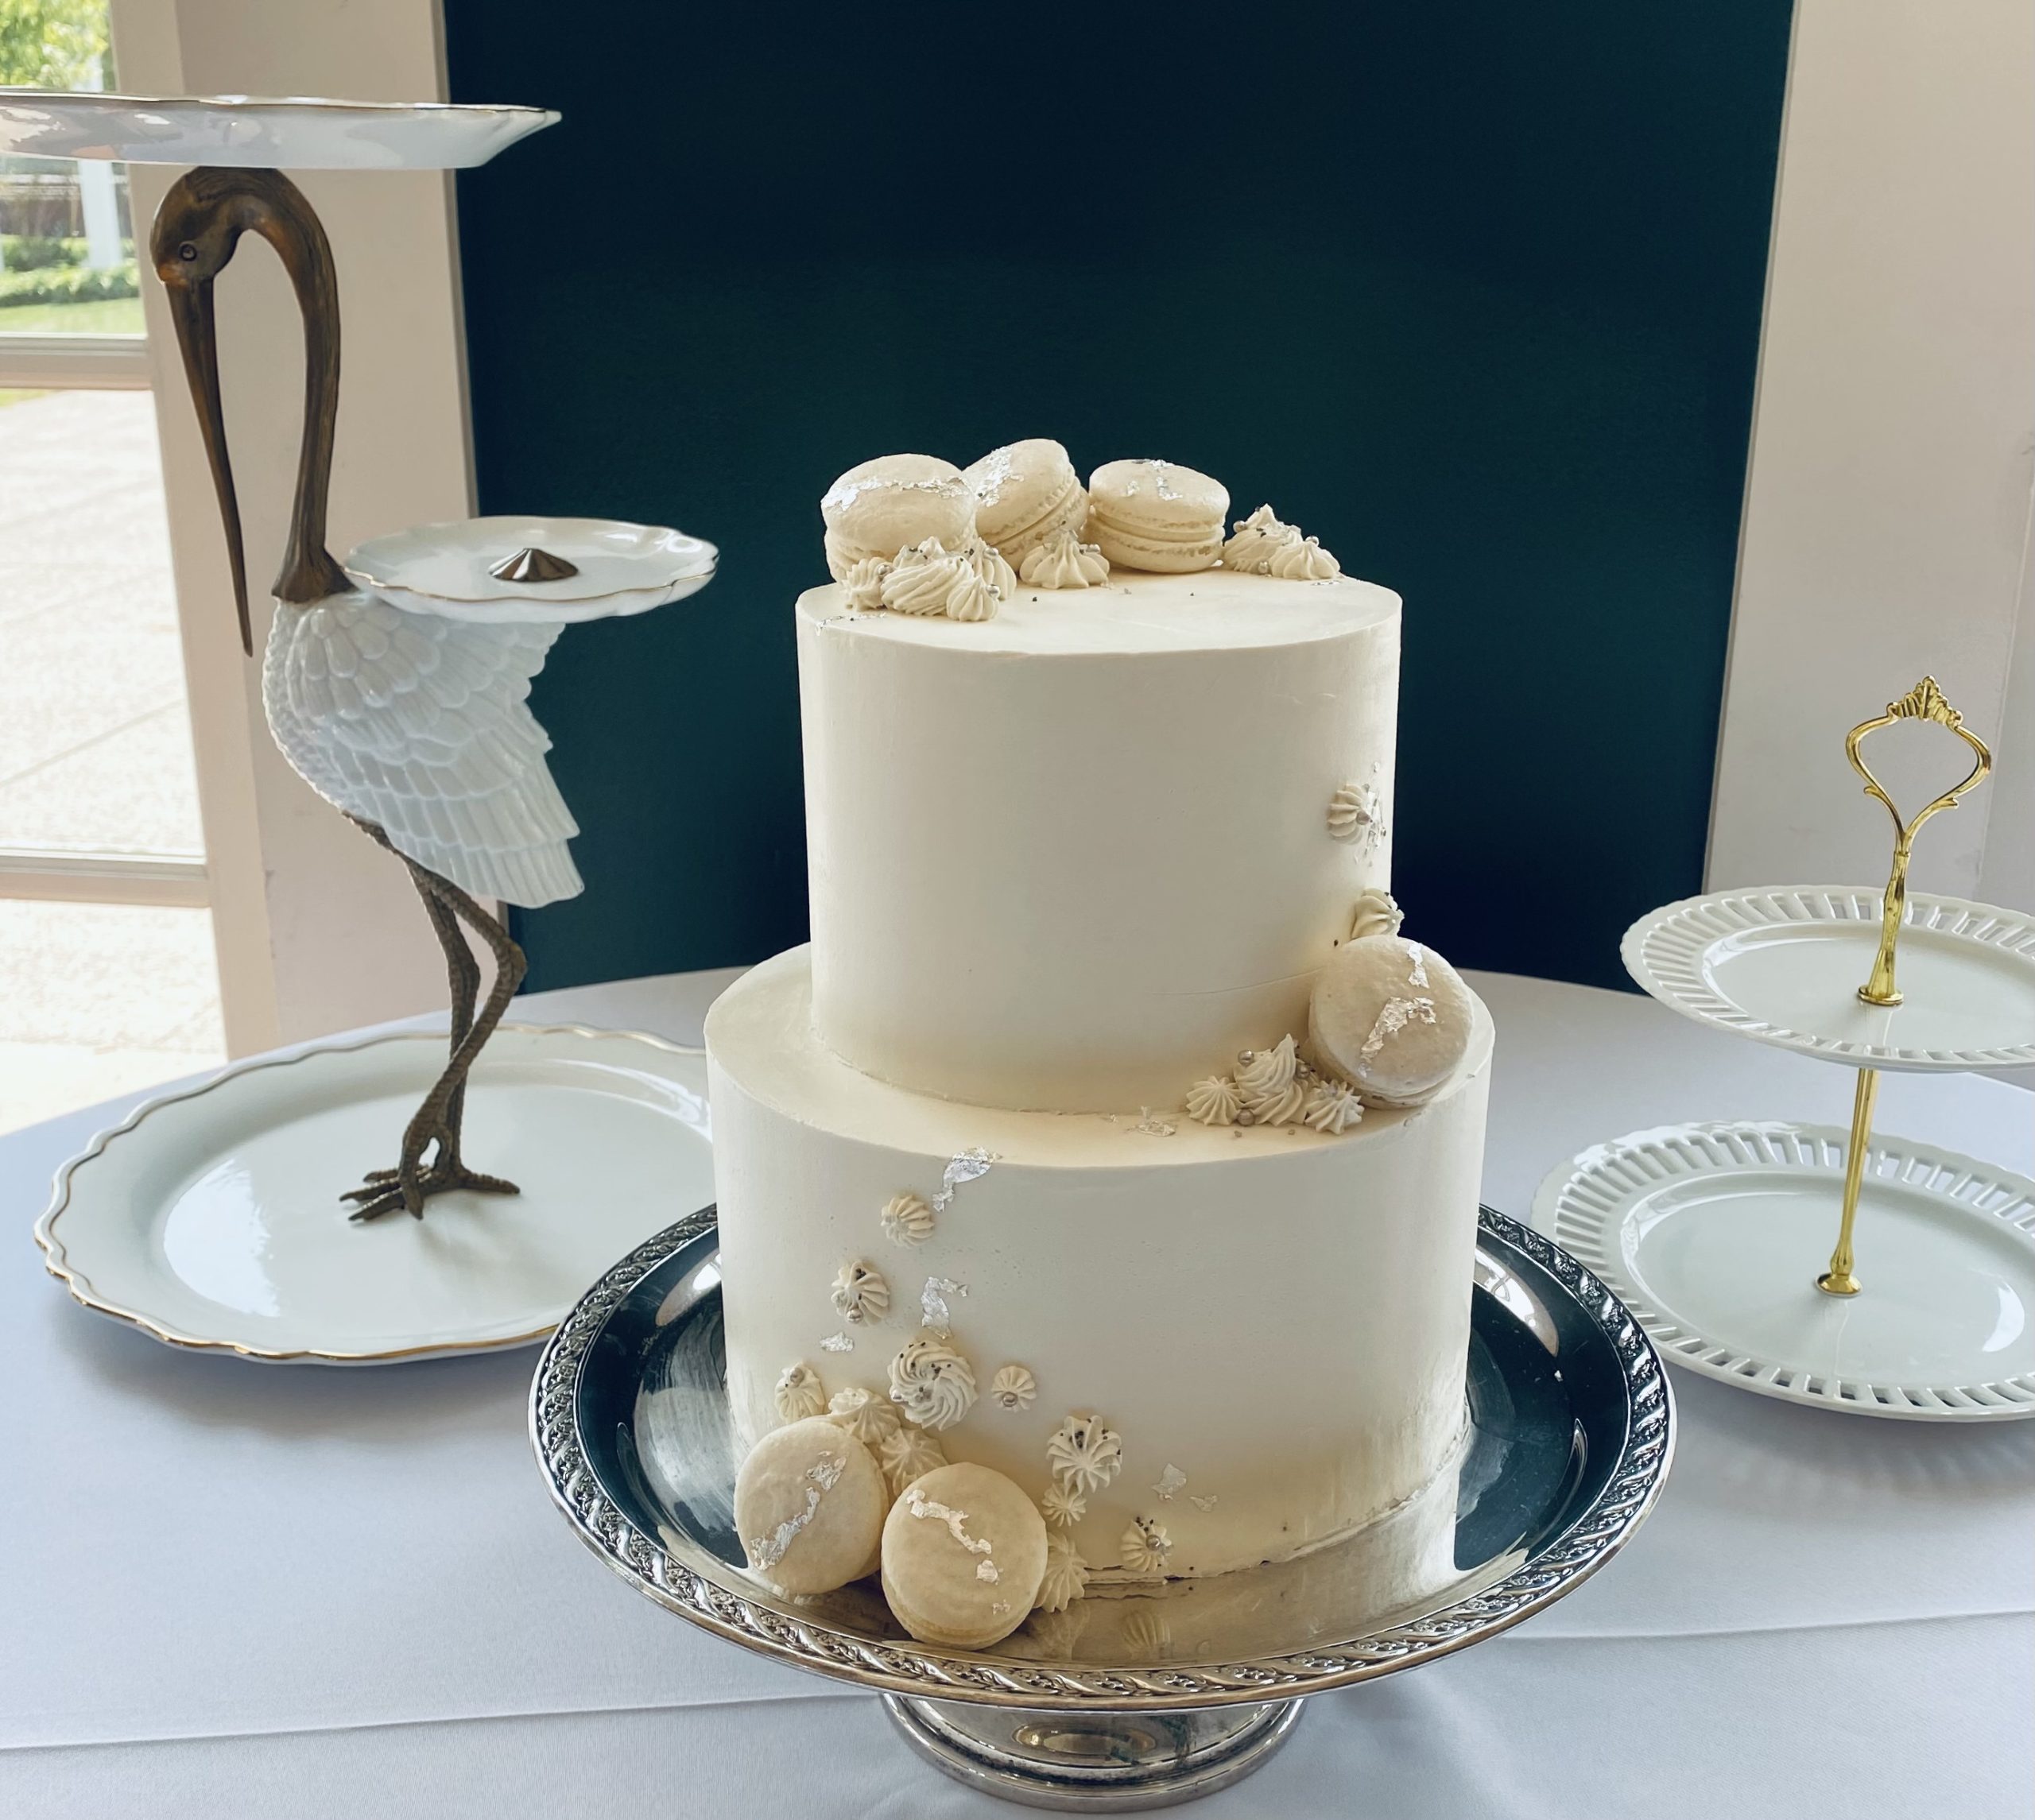 A beautiful 2-tier custom wedding cake with macarons and buttercream dollops from Village Patisserie in Toledo, Ohio